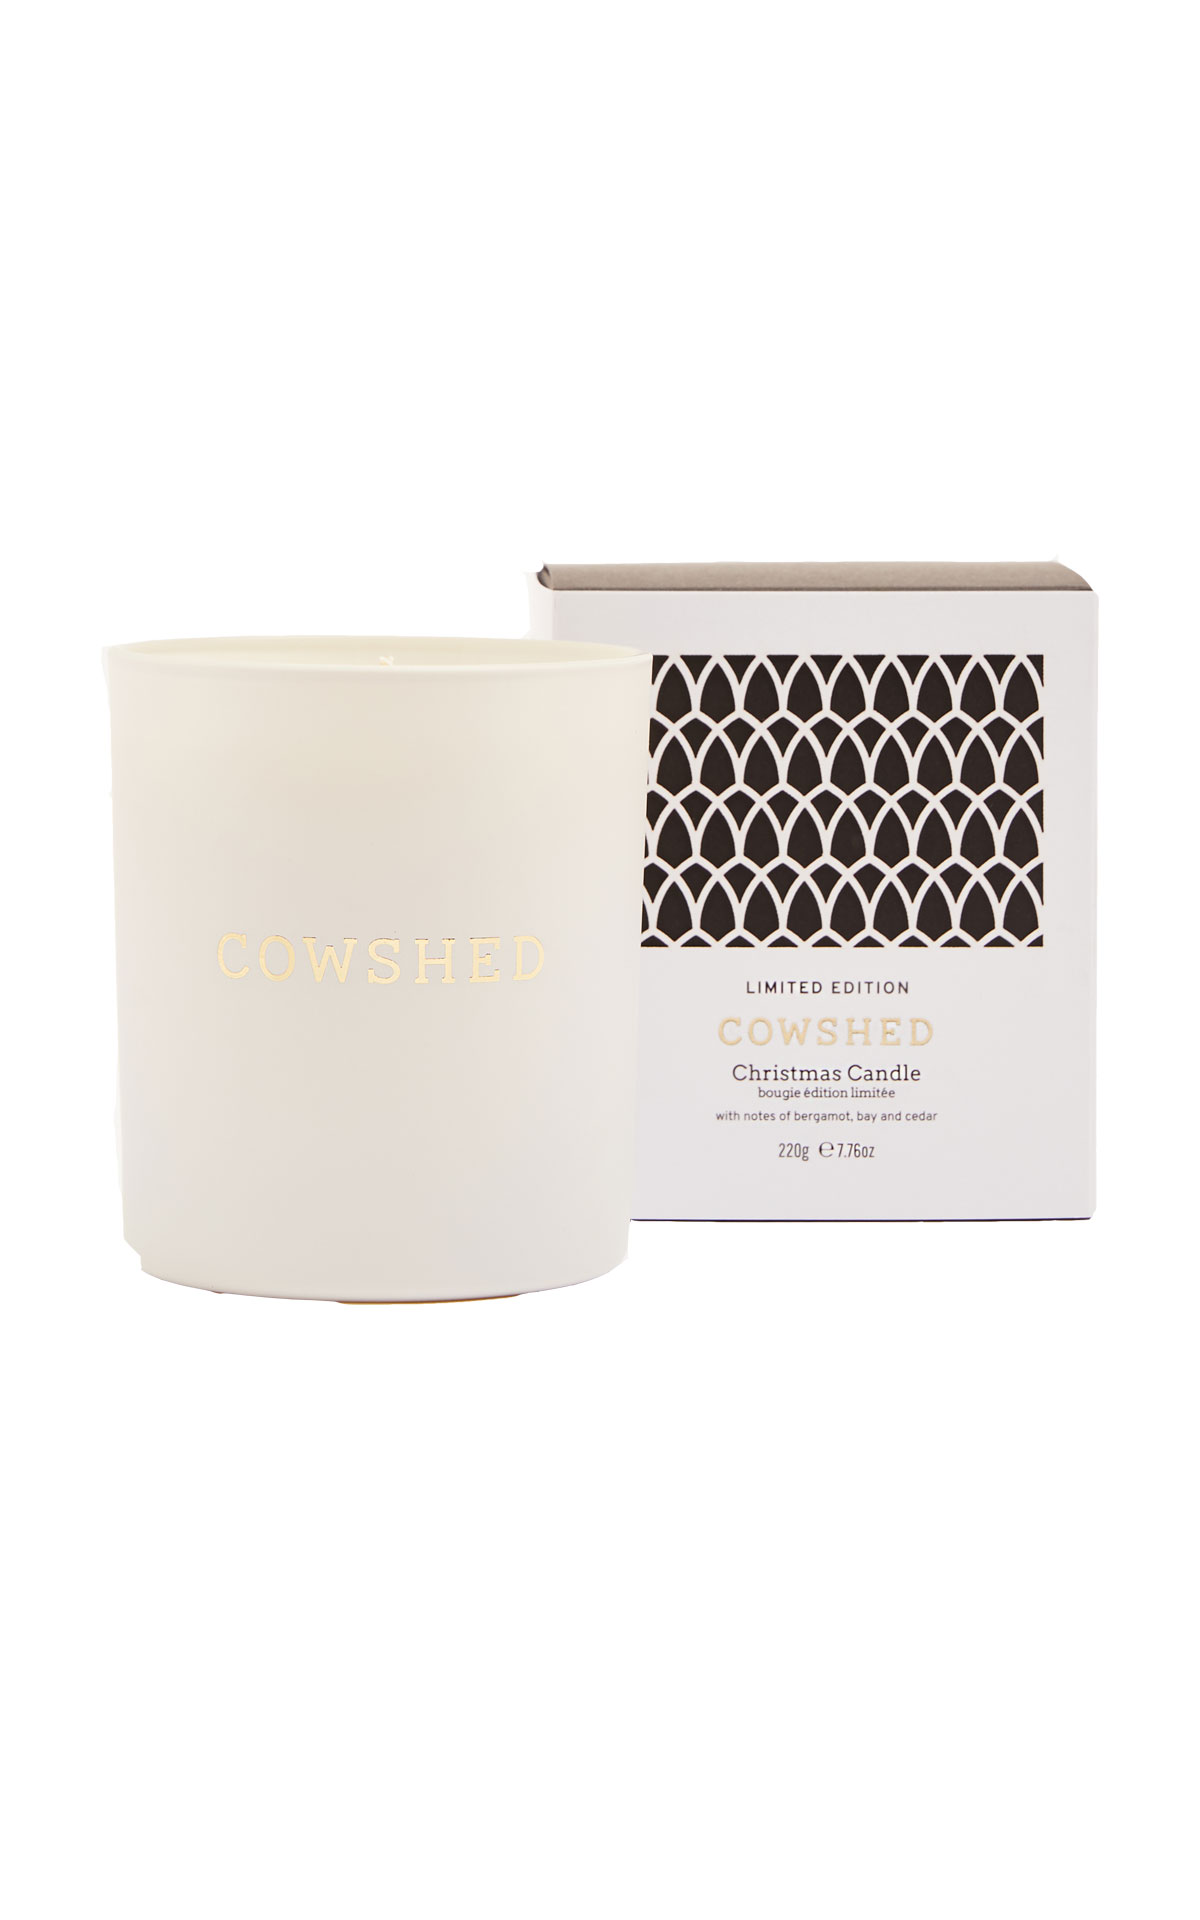 Soho Home COWSHED christmas candle 220g from Bicester Village